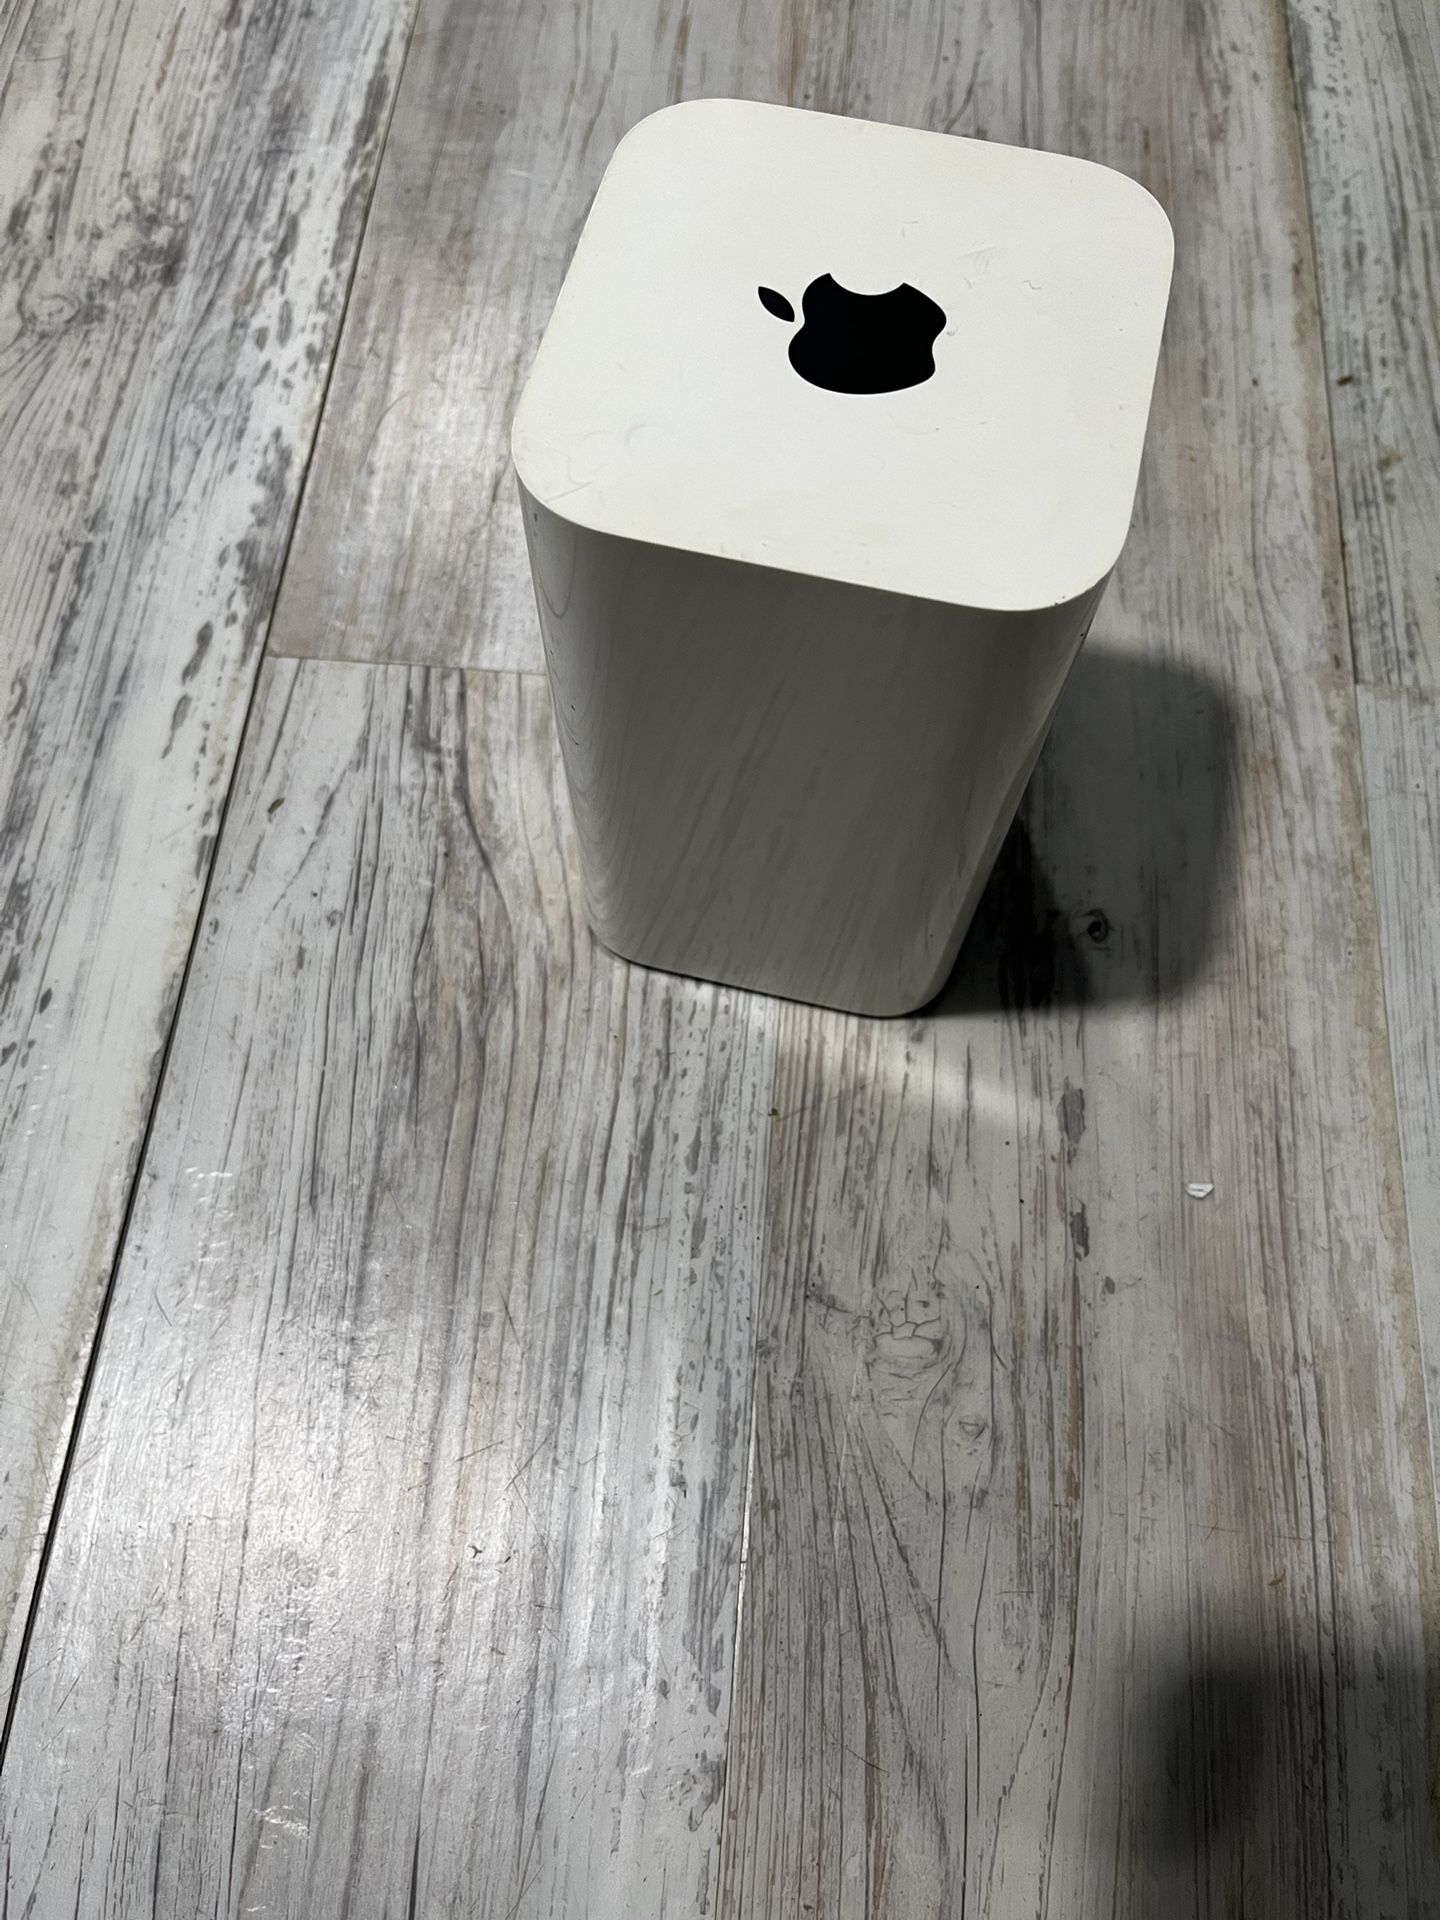 Apple Router Almost New 